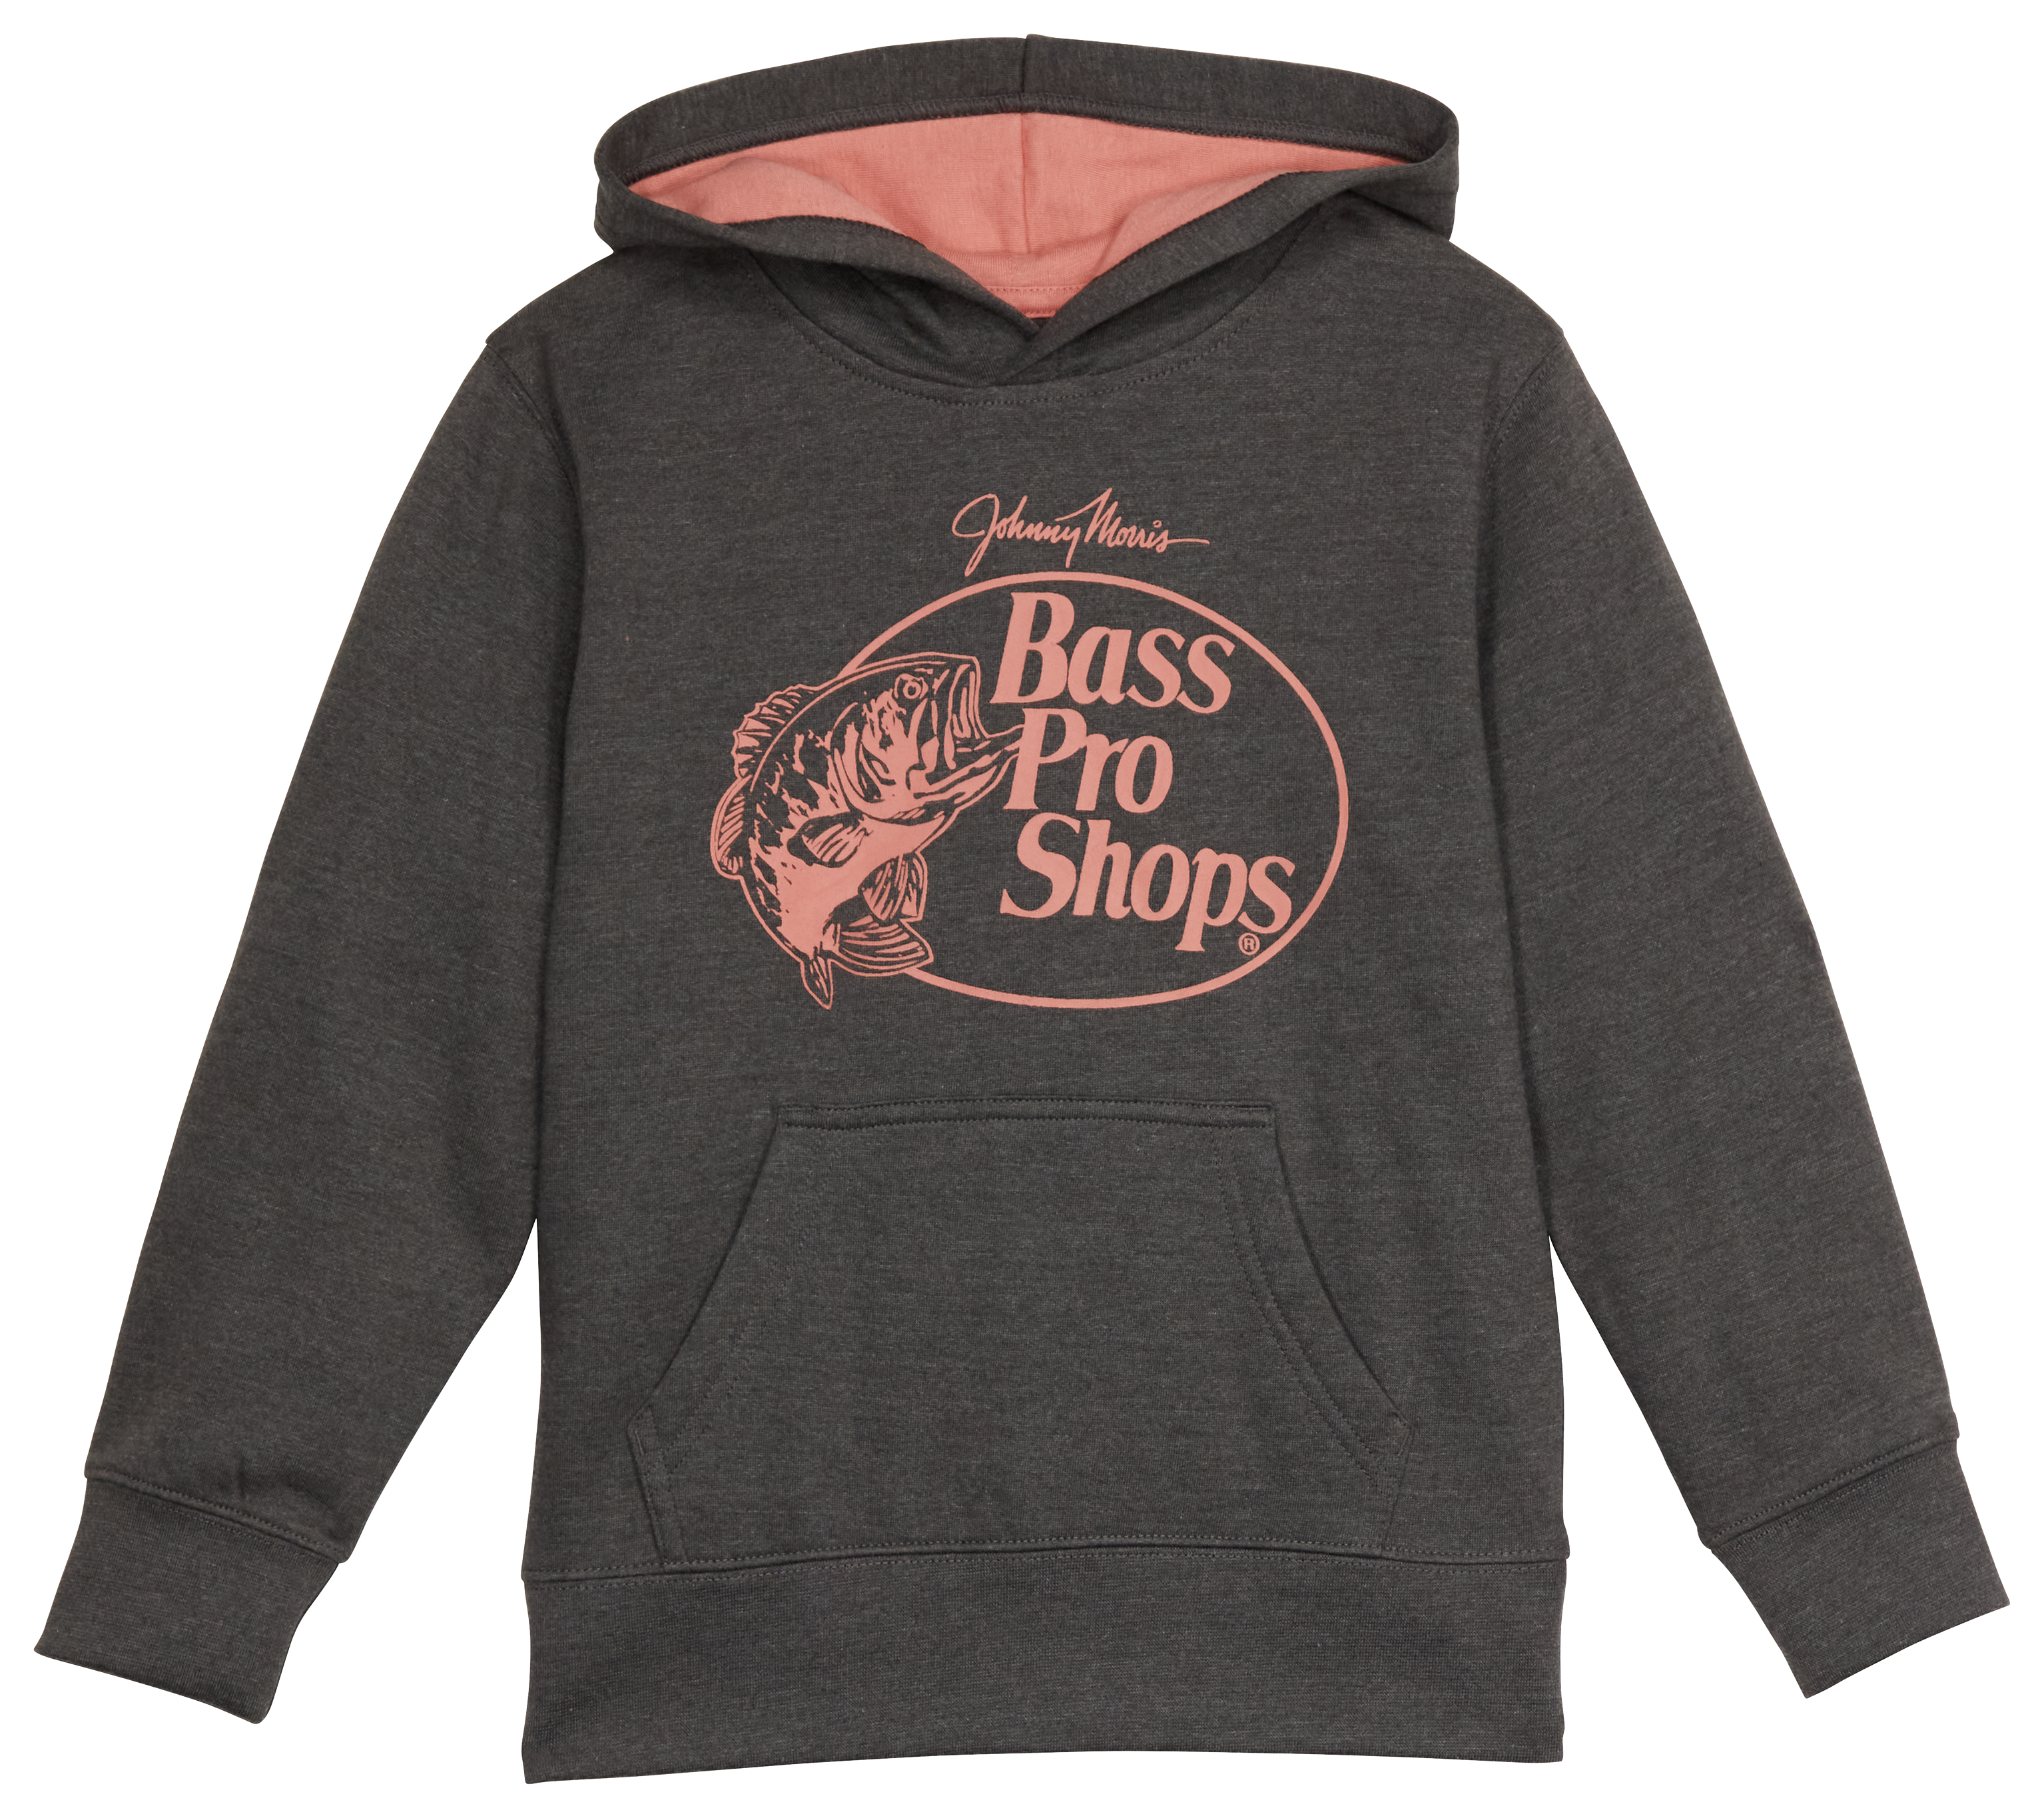 Bass Pro Shops Original Logo Long-Sleeve Hoodie for Toddlers - India Ink - 2T